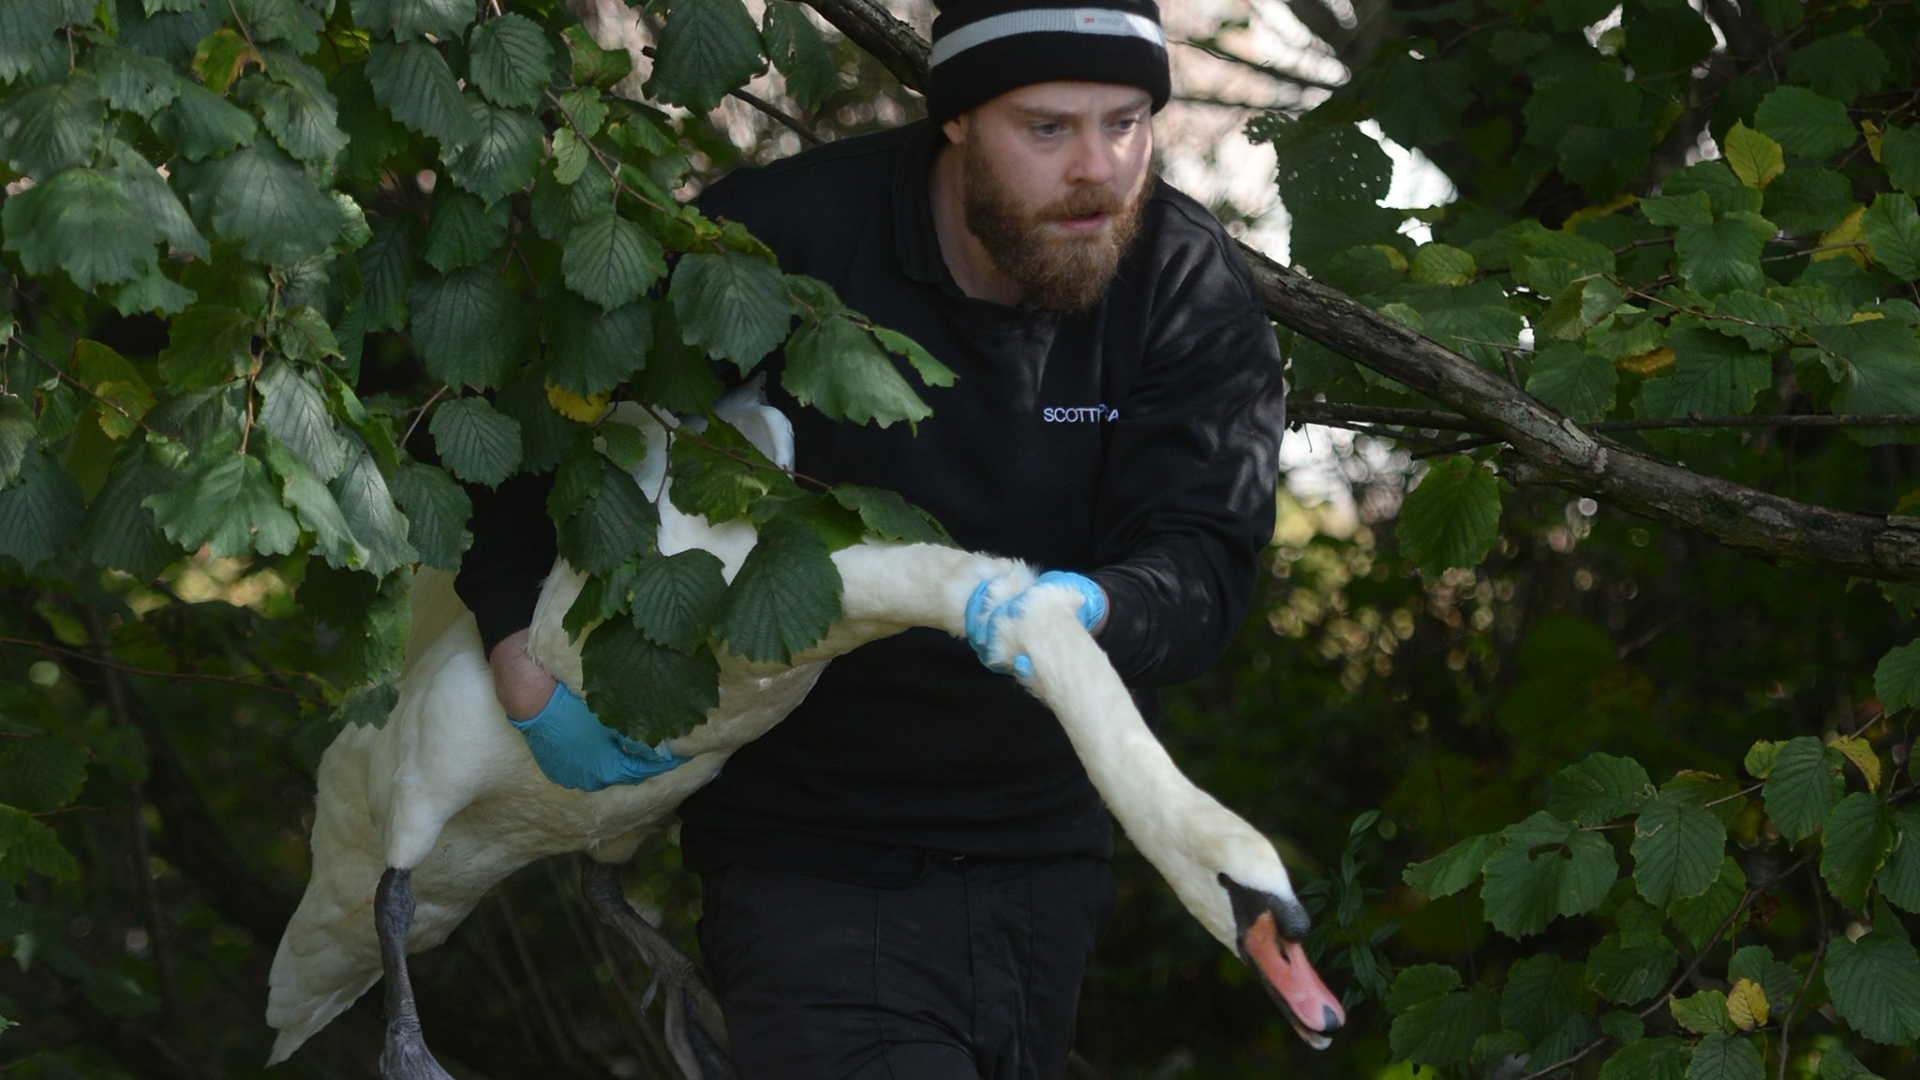 A heroic Scottish SPCA officer removed the swan